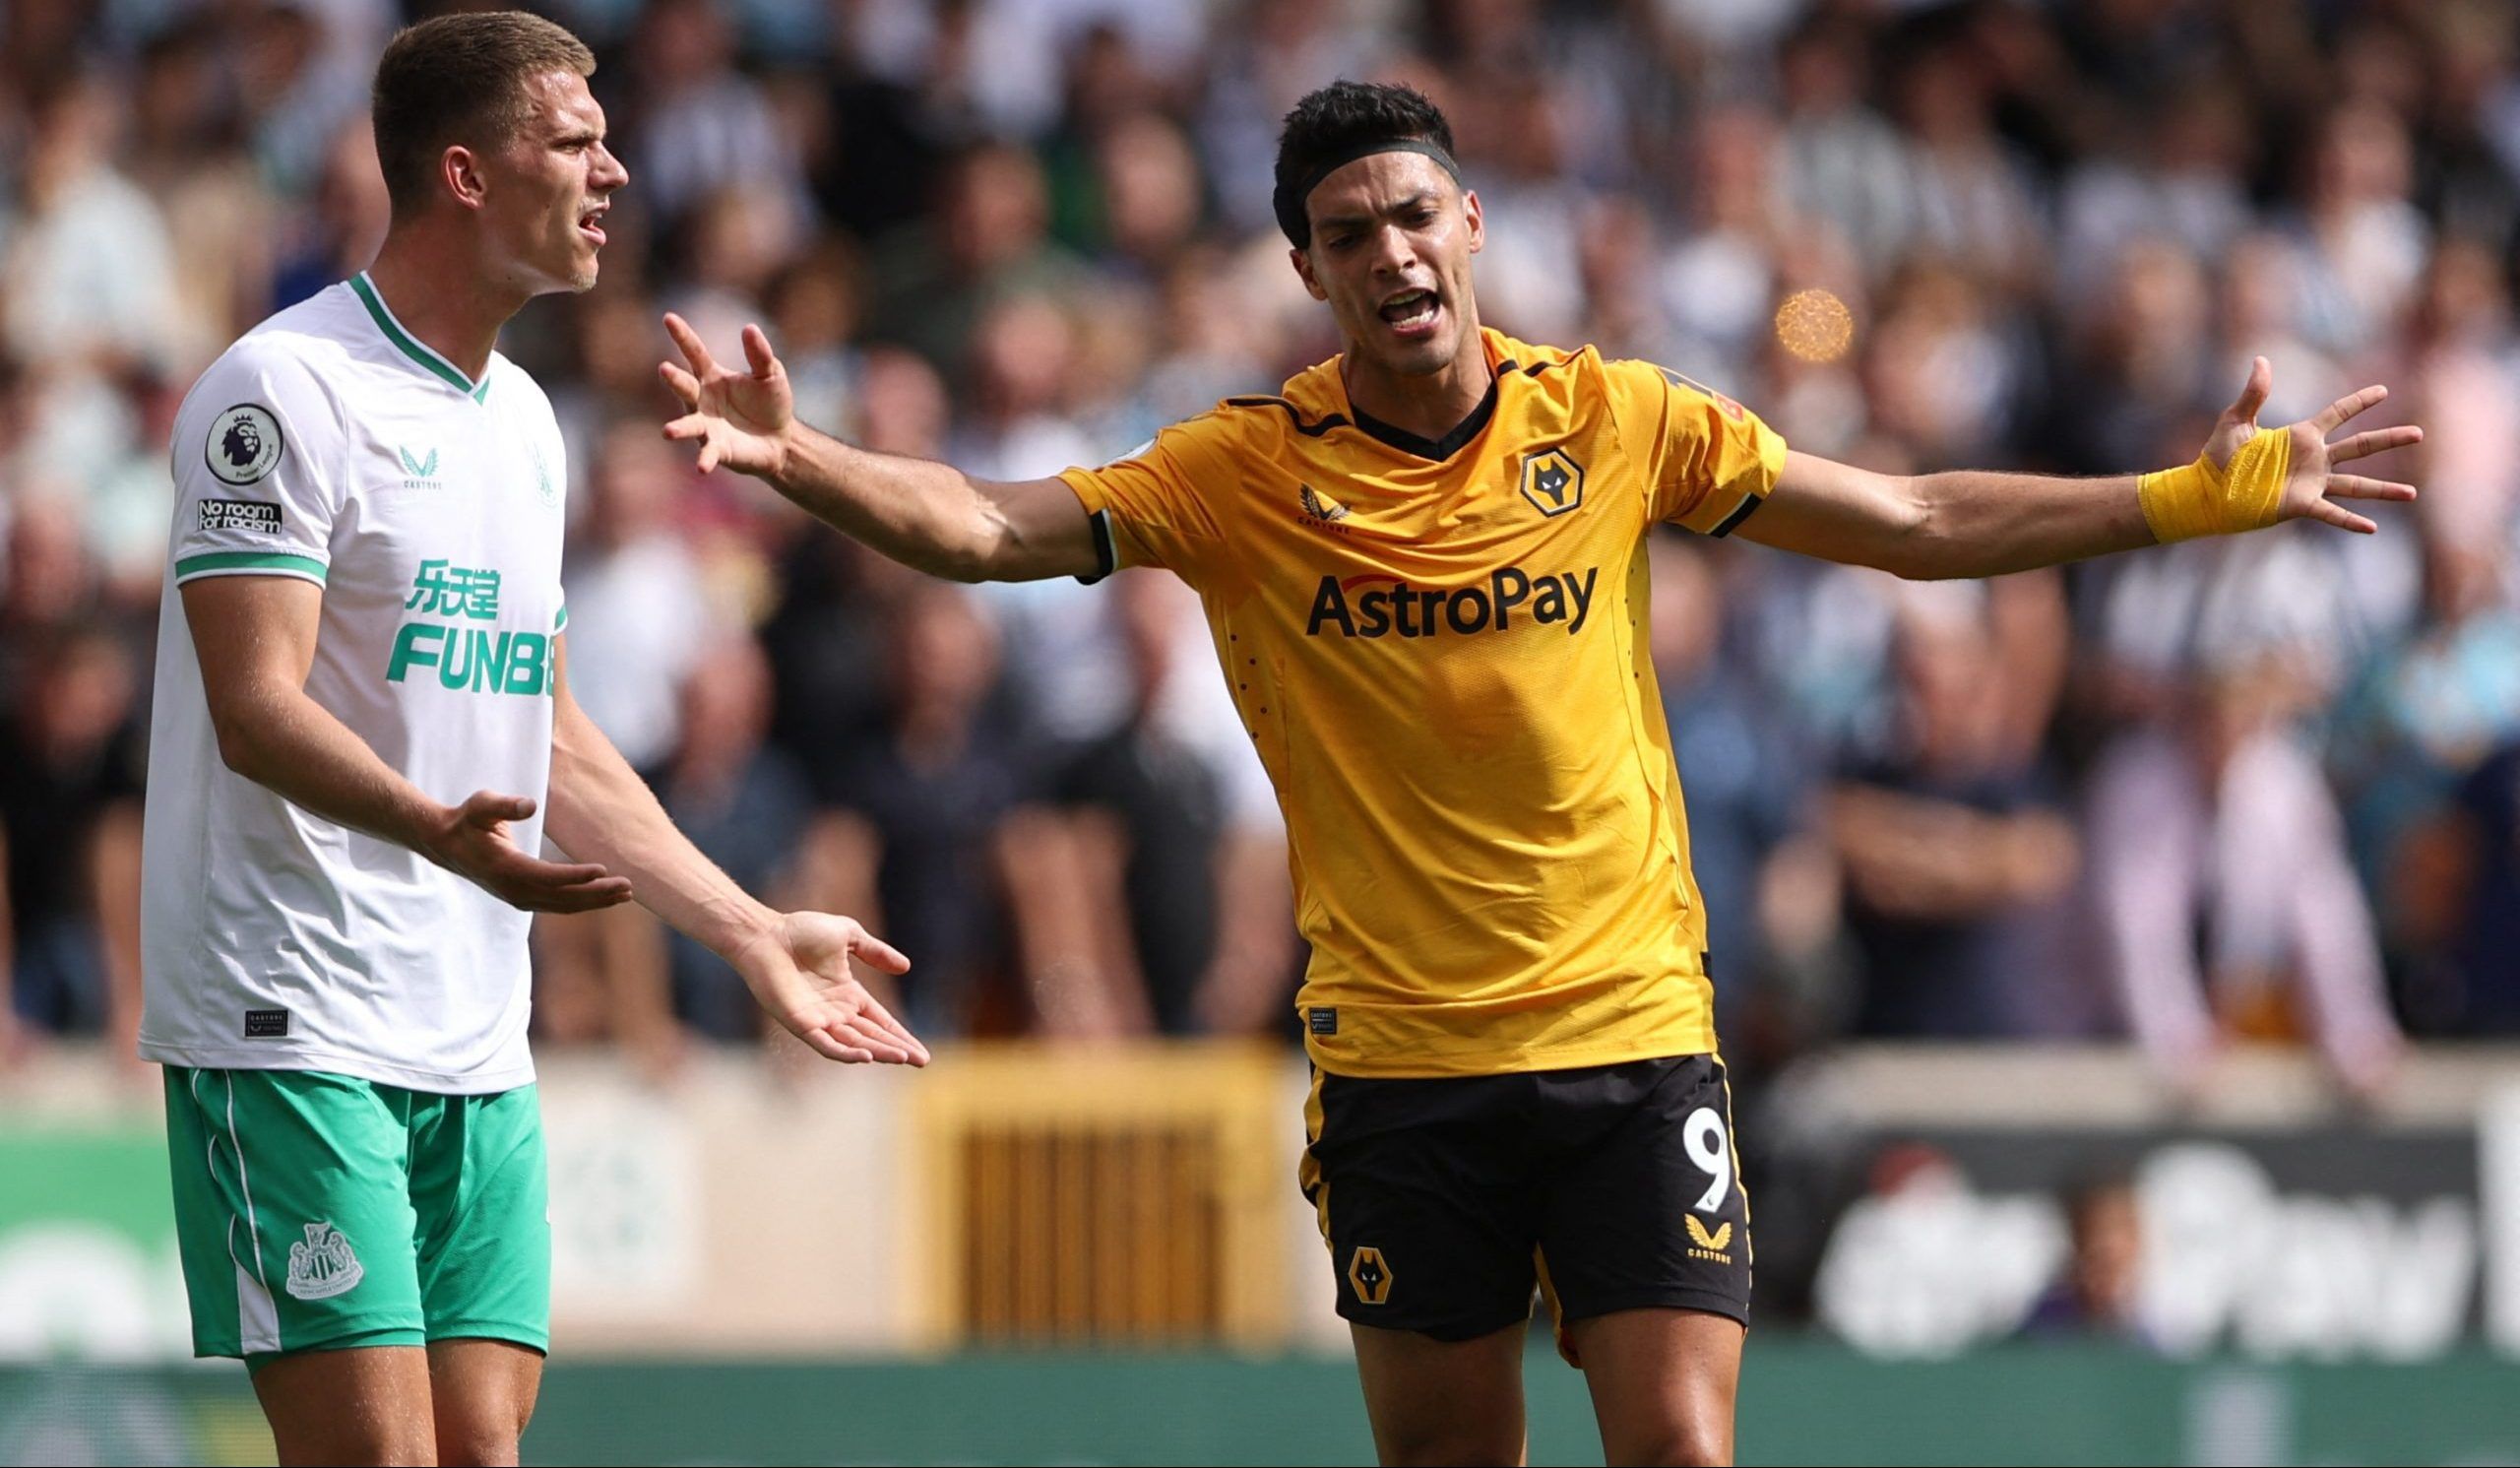 Soccer Football - Premier League - Wolverhampton Wanderers v Newcastle United - Molineux Stadium, Wolverhampton, Britain - August 28, 2022 Wolverhampton Wanderers' Raul Jimenez reacts after being fouled by Newcastle United's Sven Botman Action Images via Reuters/Molly Darlington EDITORIAL USE ONLY. No use with unauthorized audio, video, data, fixture lists, club/league logos or 'live' services. Online in-match use limited to 75 images, no video emulation. No use in betting, games or single club 